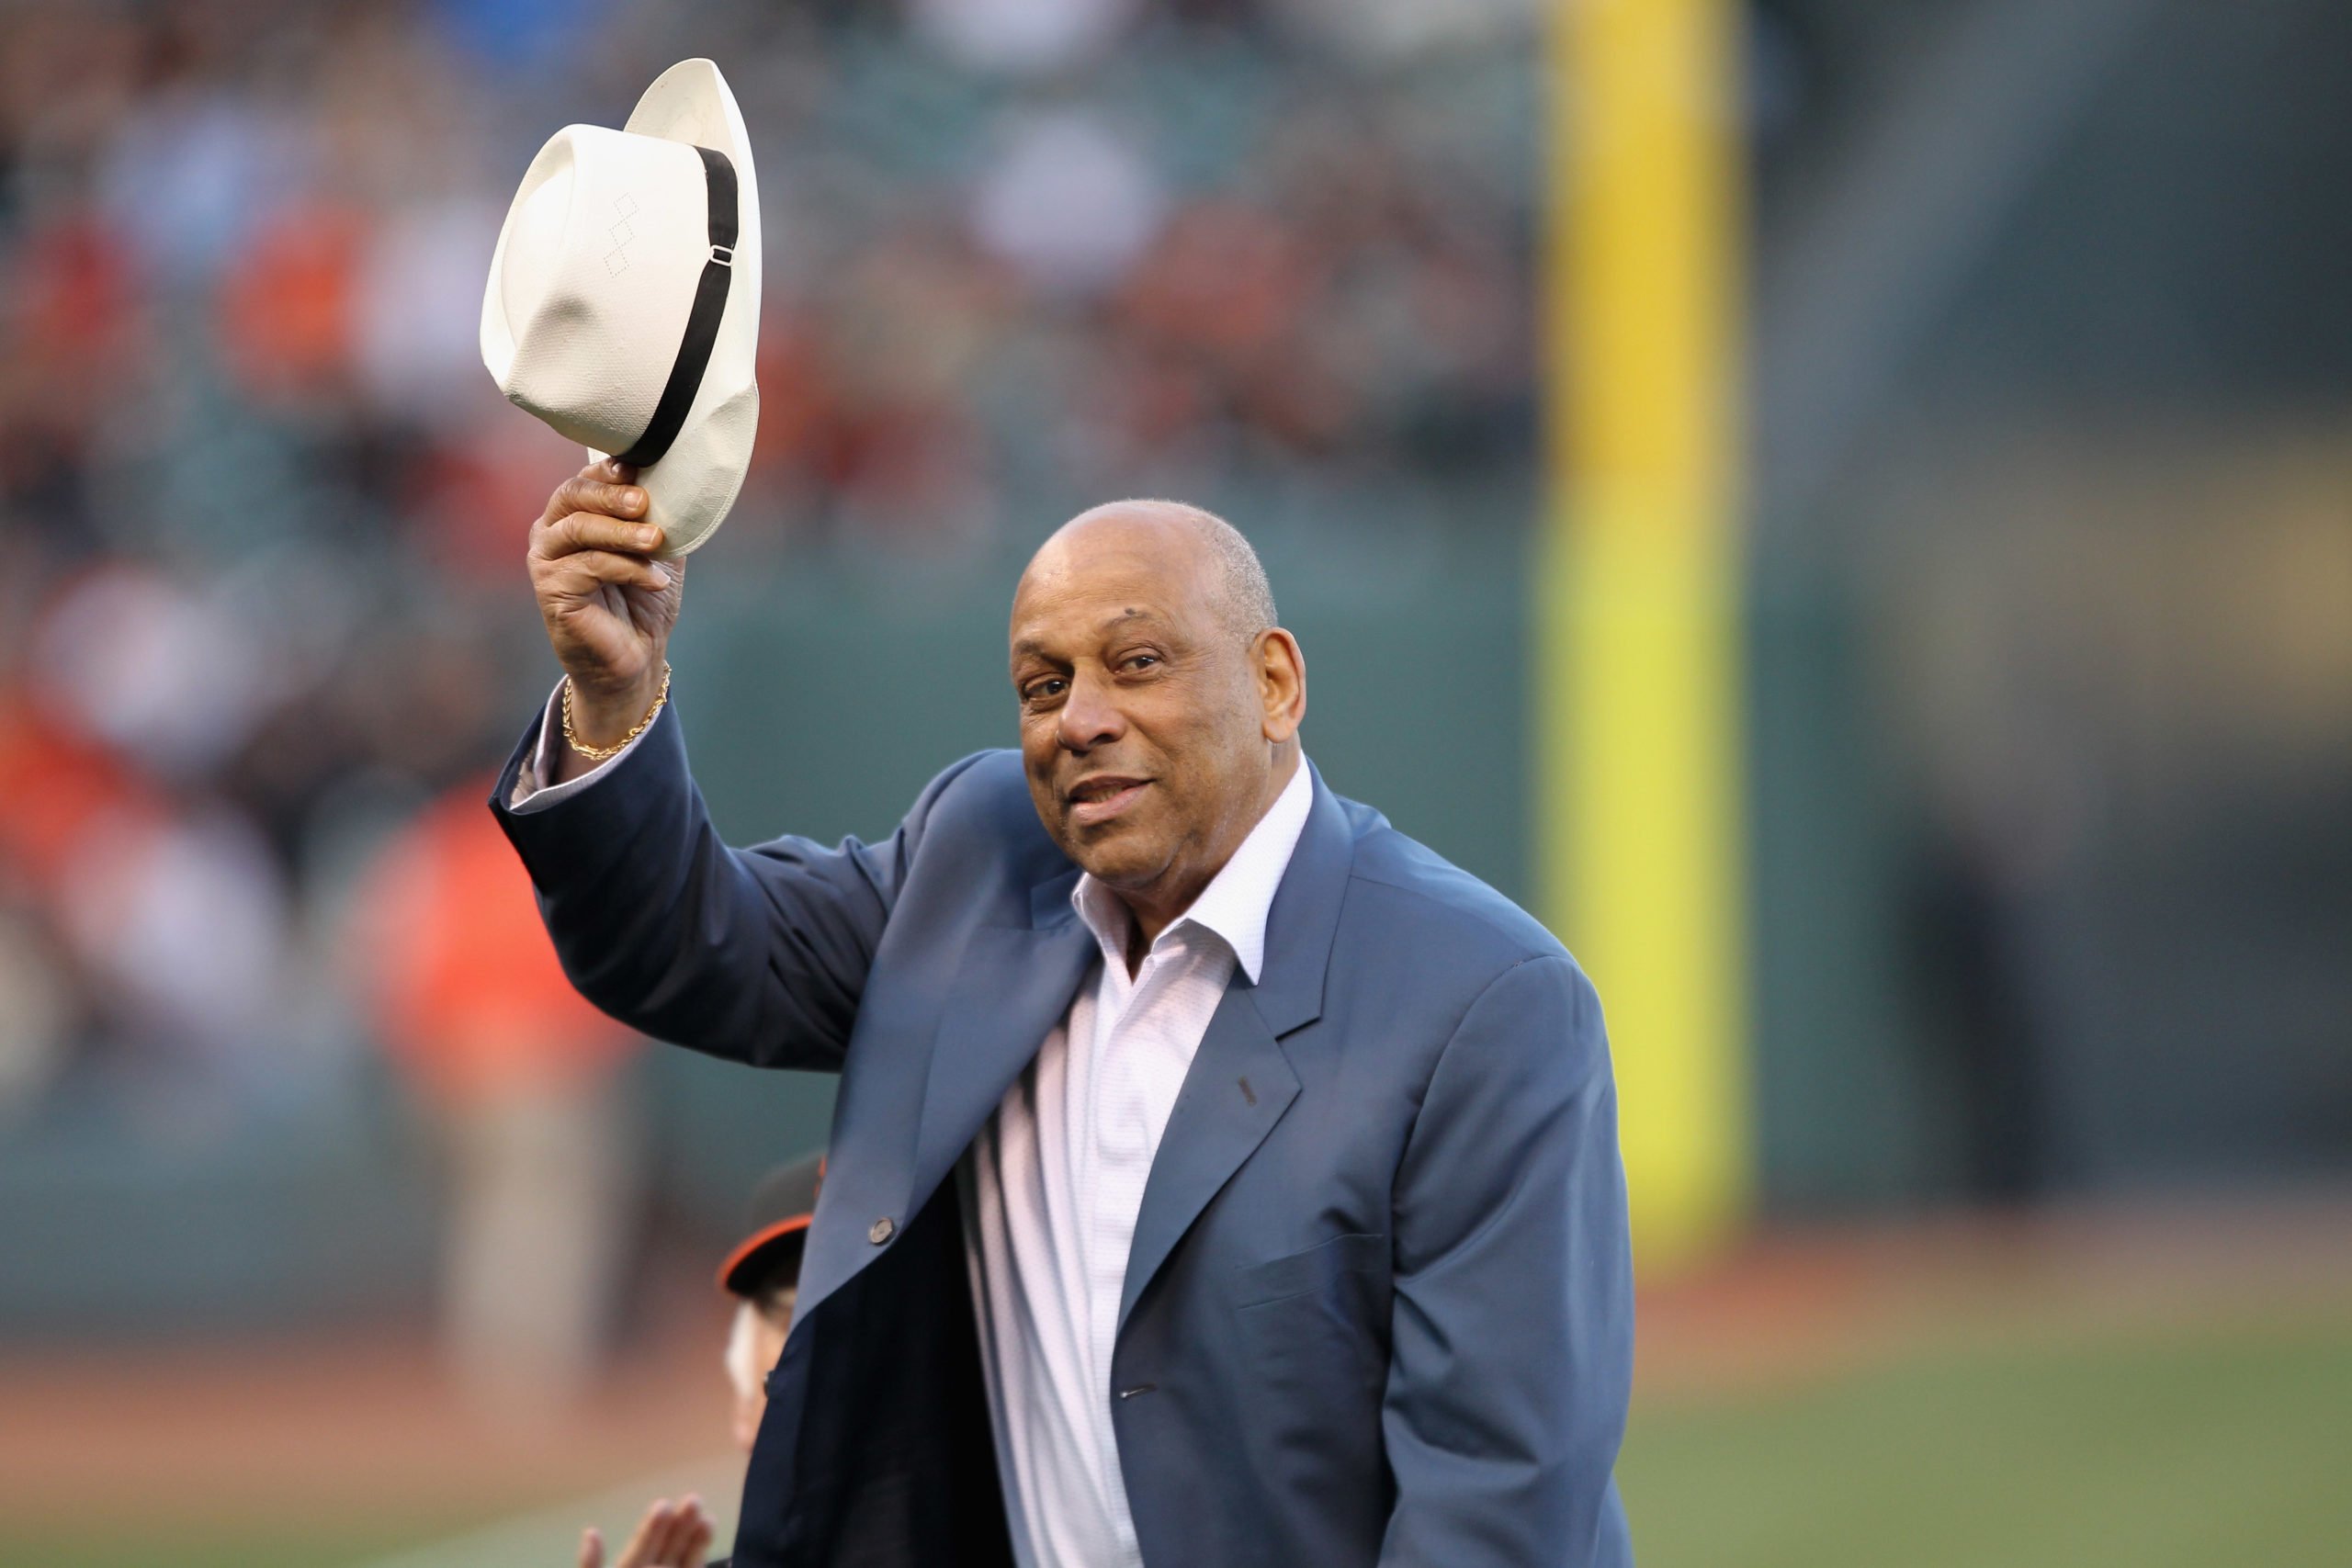 SAN FRANCISCO, CA - MAY 06: Orlando Cepeda waves to the crowd during a ceremony for Willie Mays' 80 birthday before the San Francisco Giants game against the Colorado Rockies at AT&T Park on May 6, 2011 in San Francisco, California. (Photo by Ezra Shaw/Getty Images)